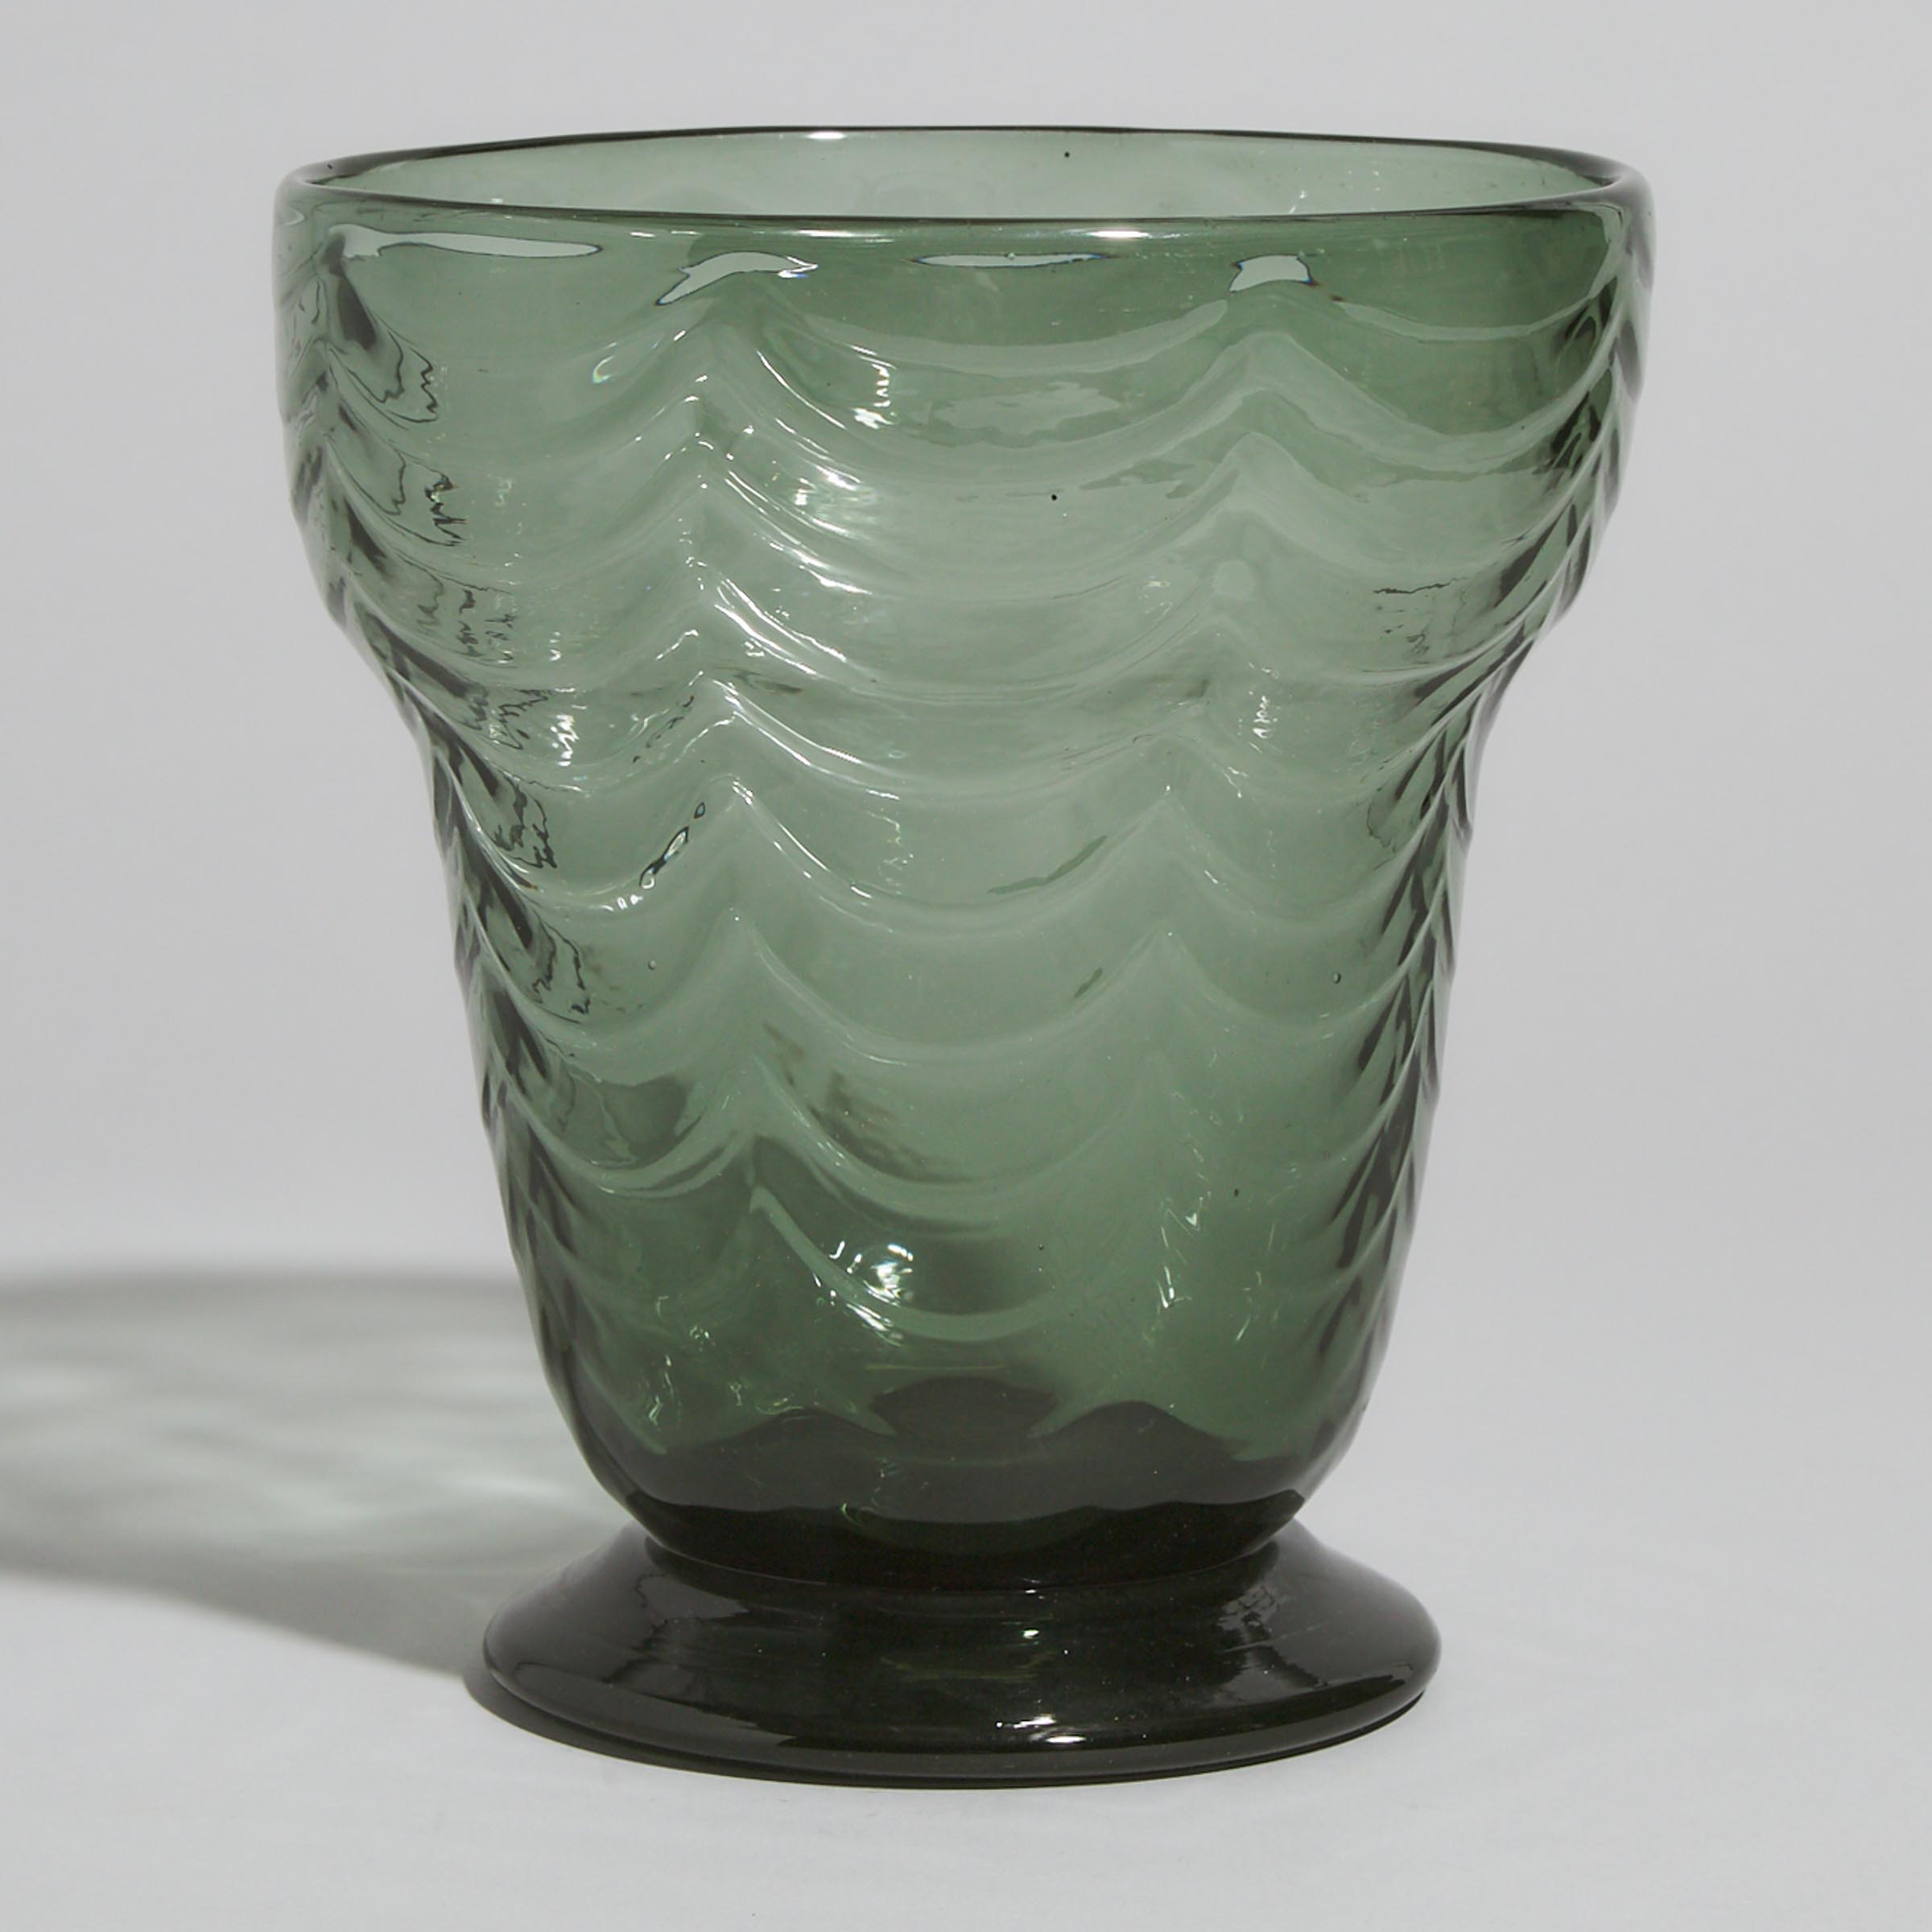 Stevens & Williams Brierley Moulded Green Glass Vase, Keith Murray, 1930s